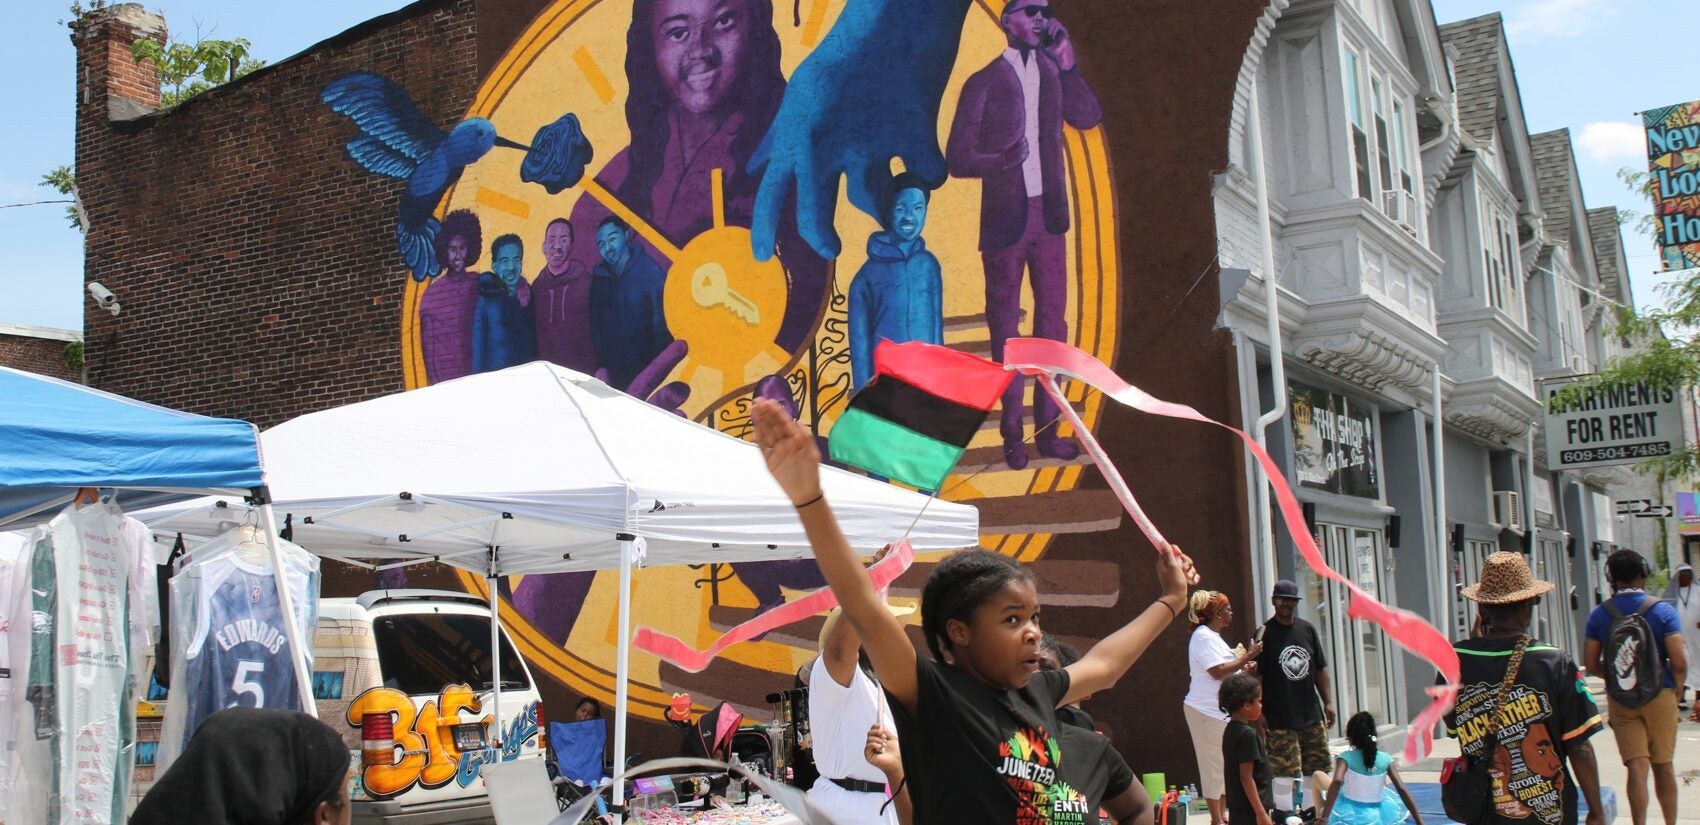 Thousands watched hundreds of people and floats make their way down 52nd Street on Sunday for Philadelphia's Juneteenth Parade and Festival. (Cory Sharber/WHYY)